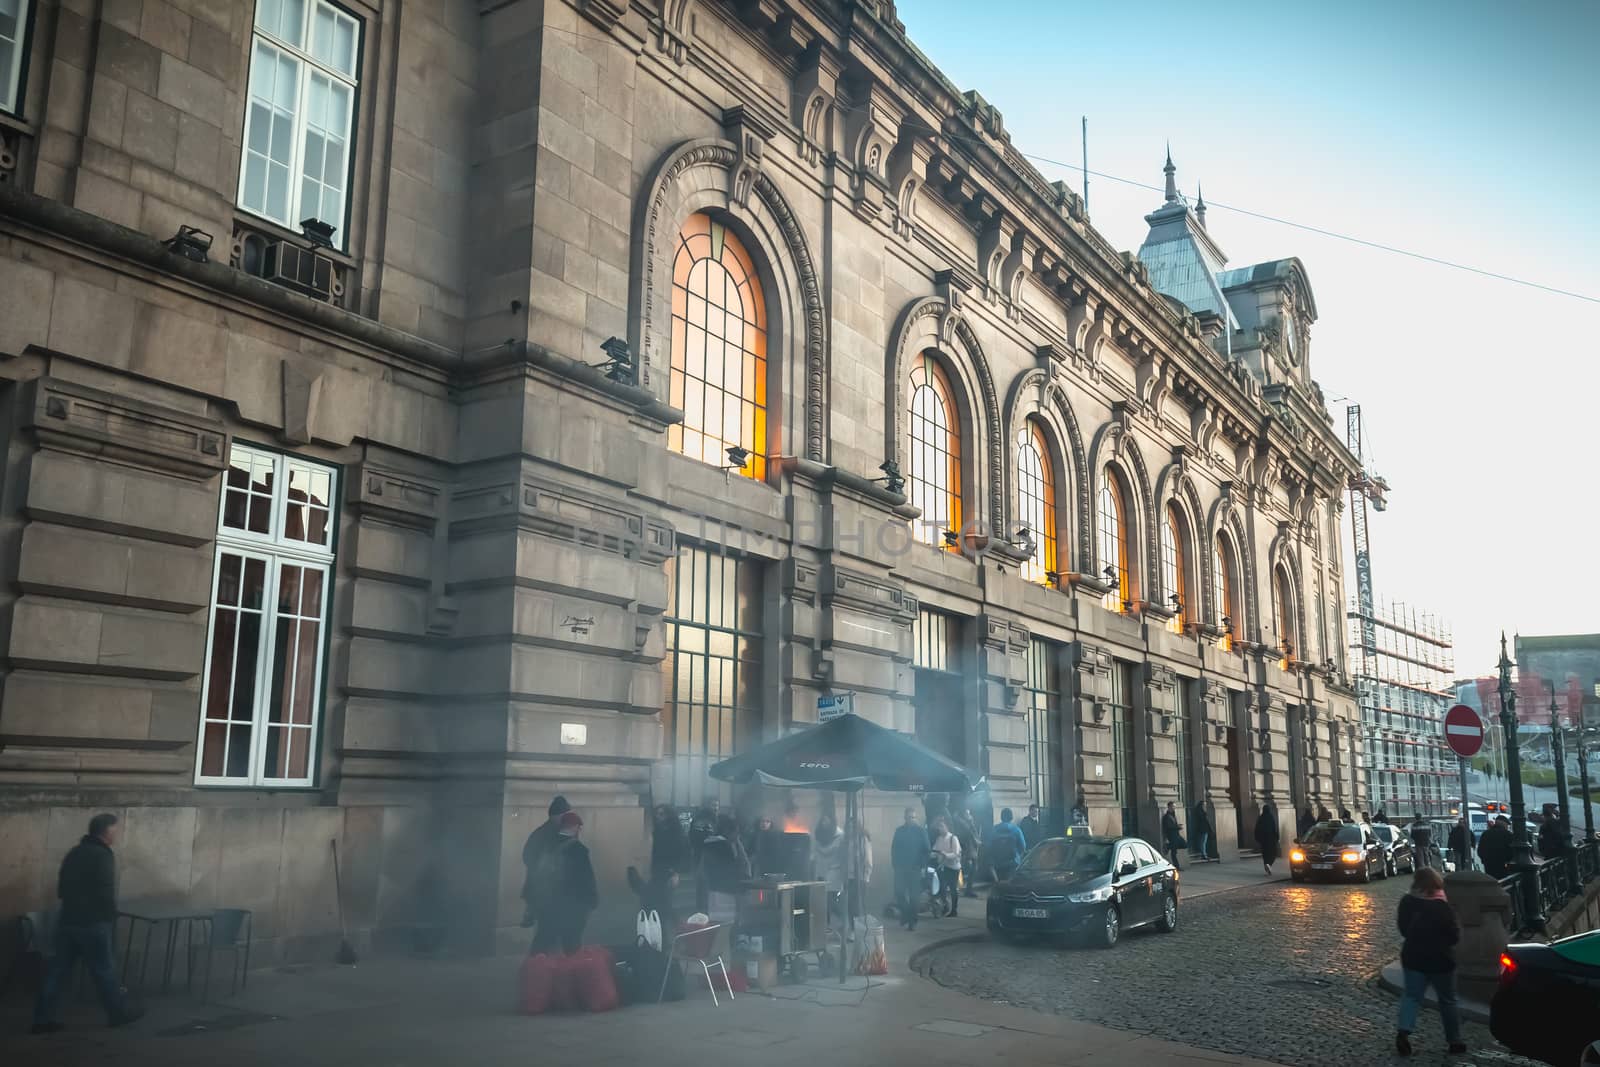 Street atmosphere in front of the Porto train station  by AtlanticEUROSTOXX